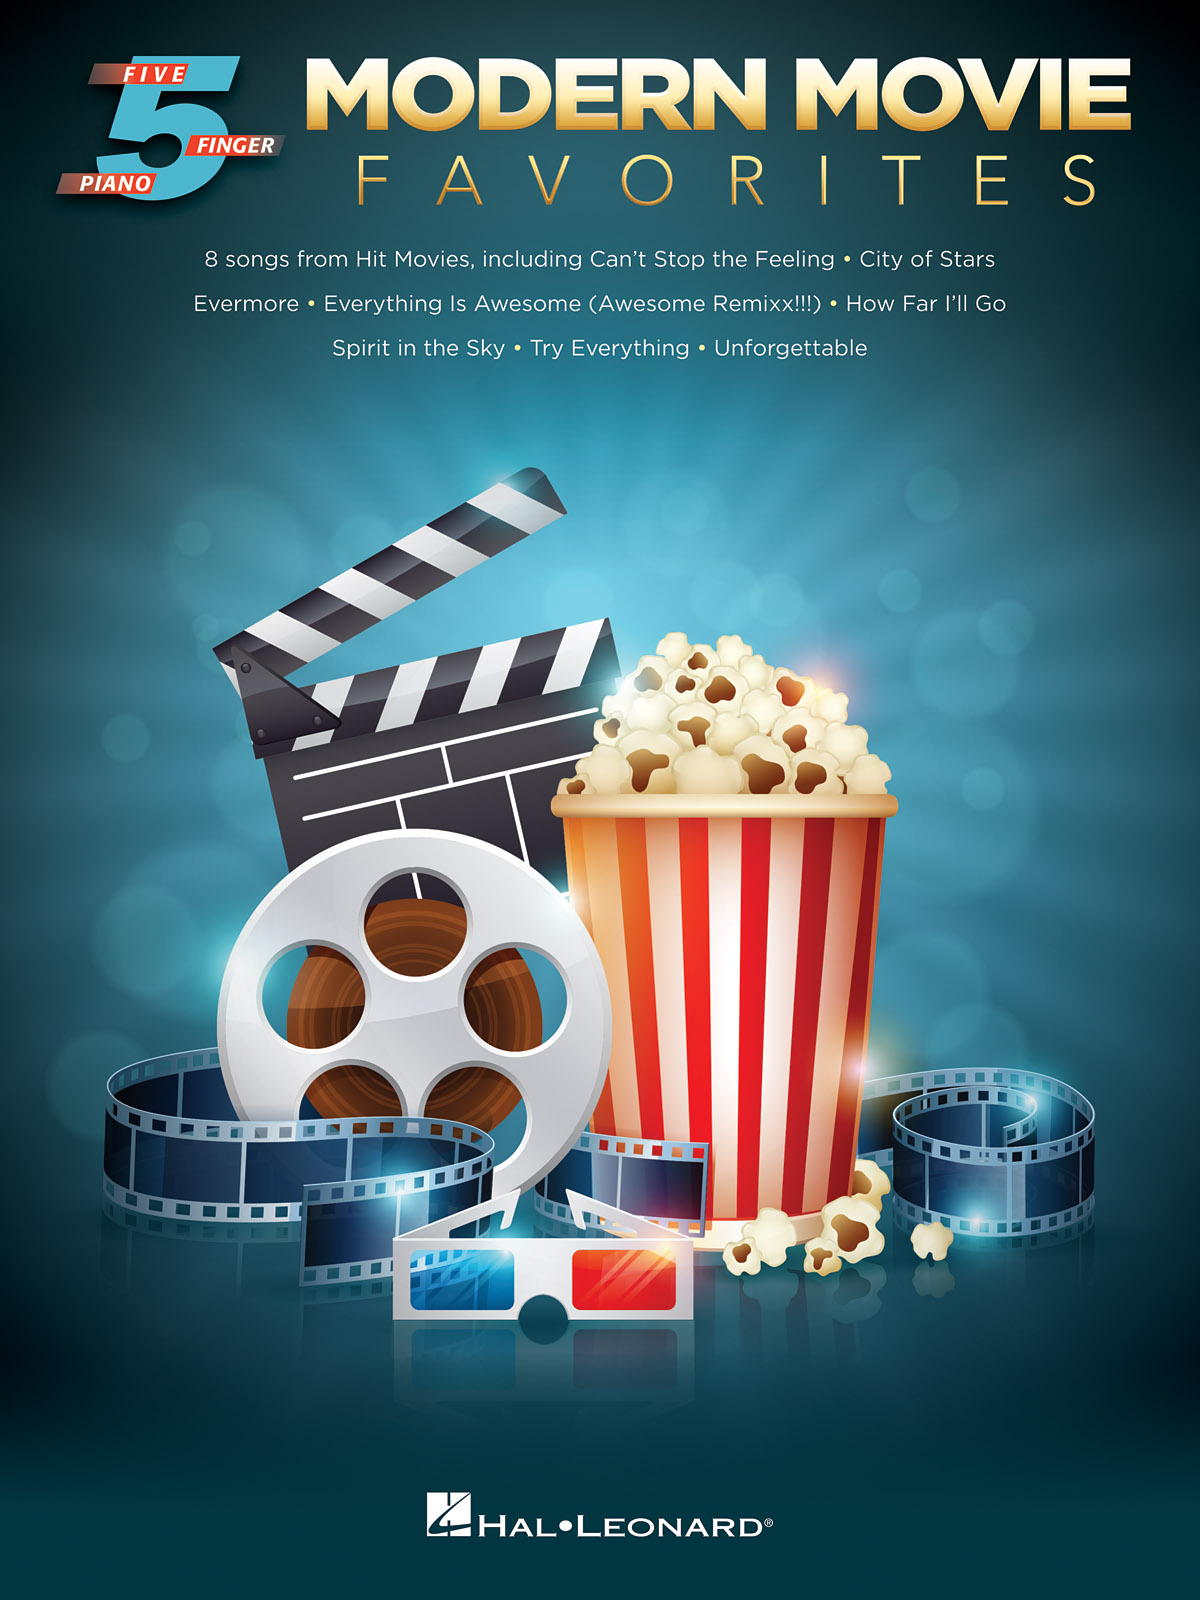 Modern Movie Favorites - Five Finger Piano Songbook